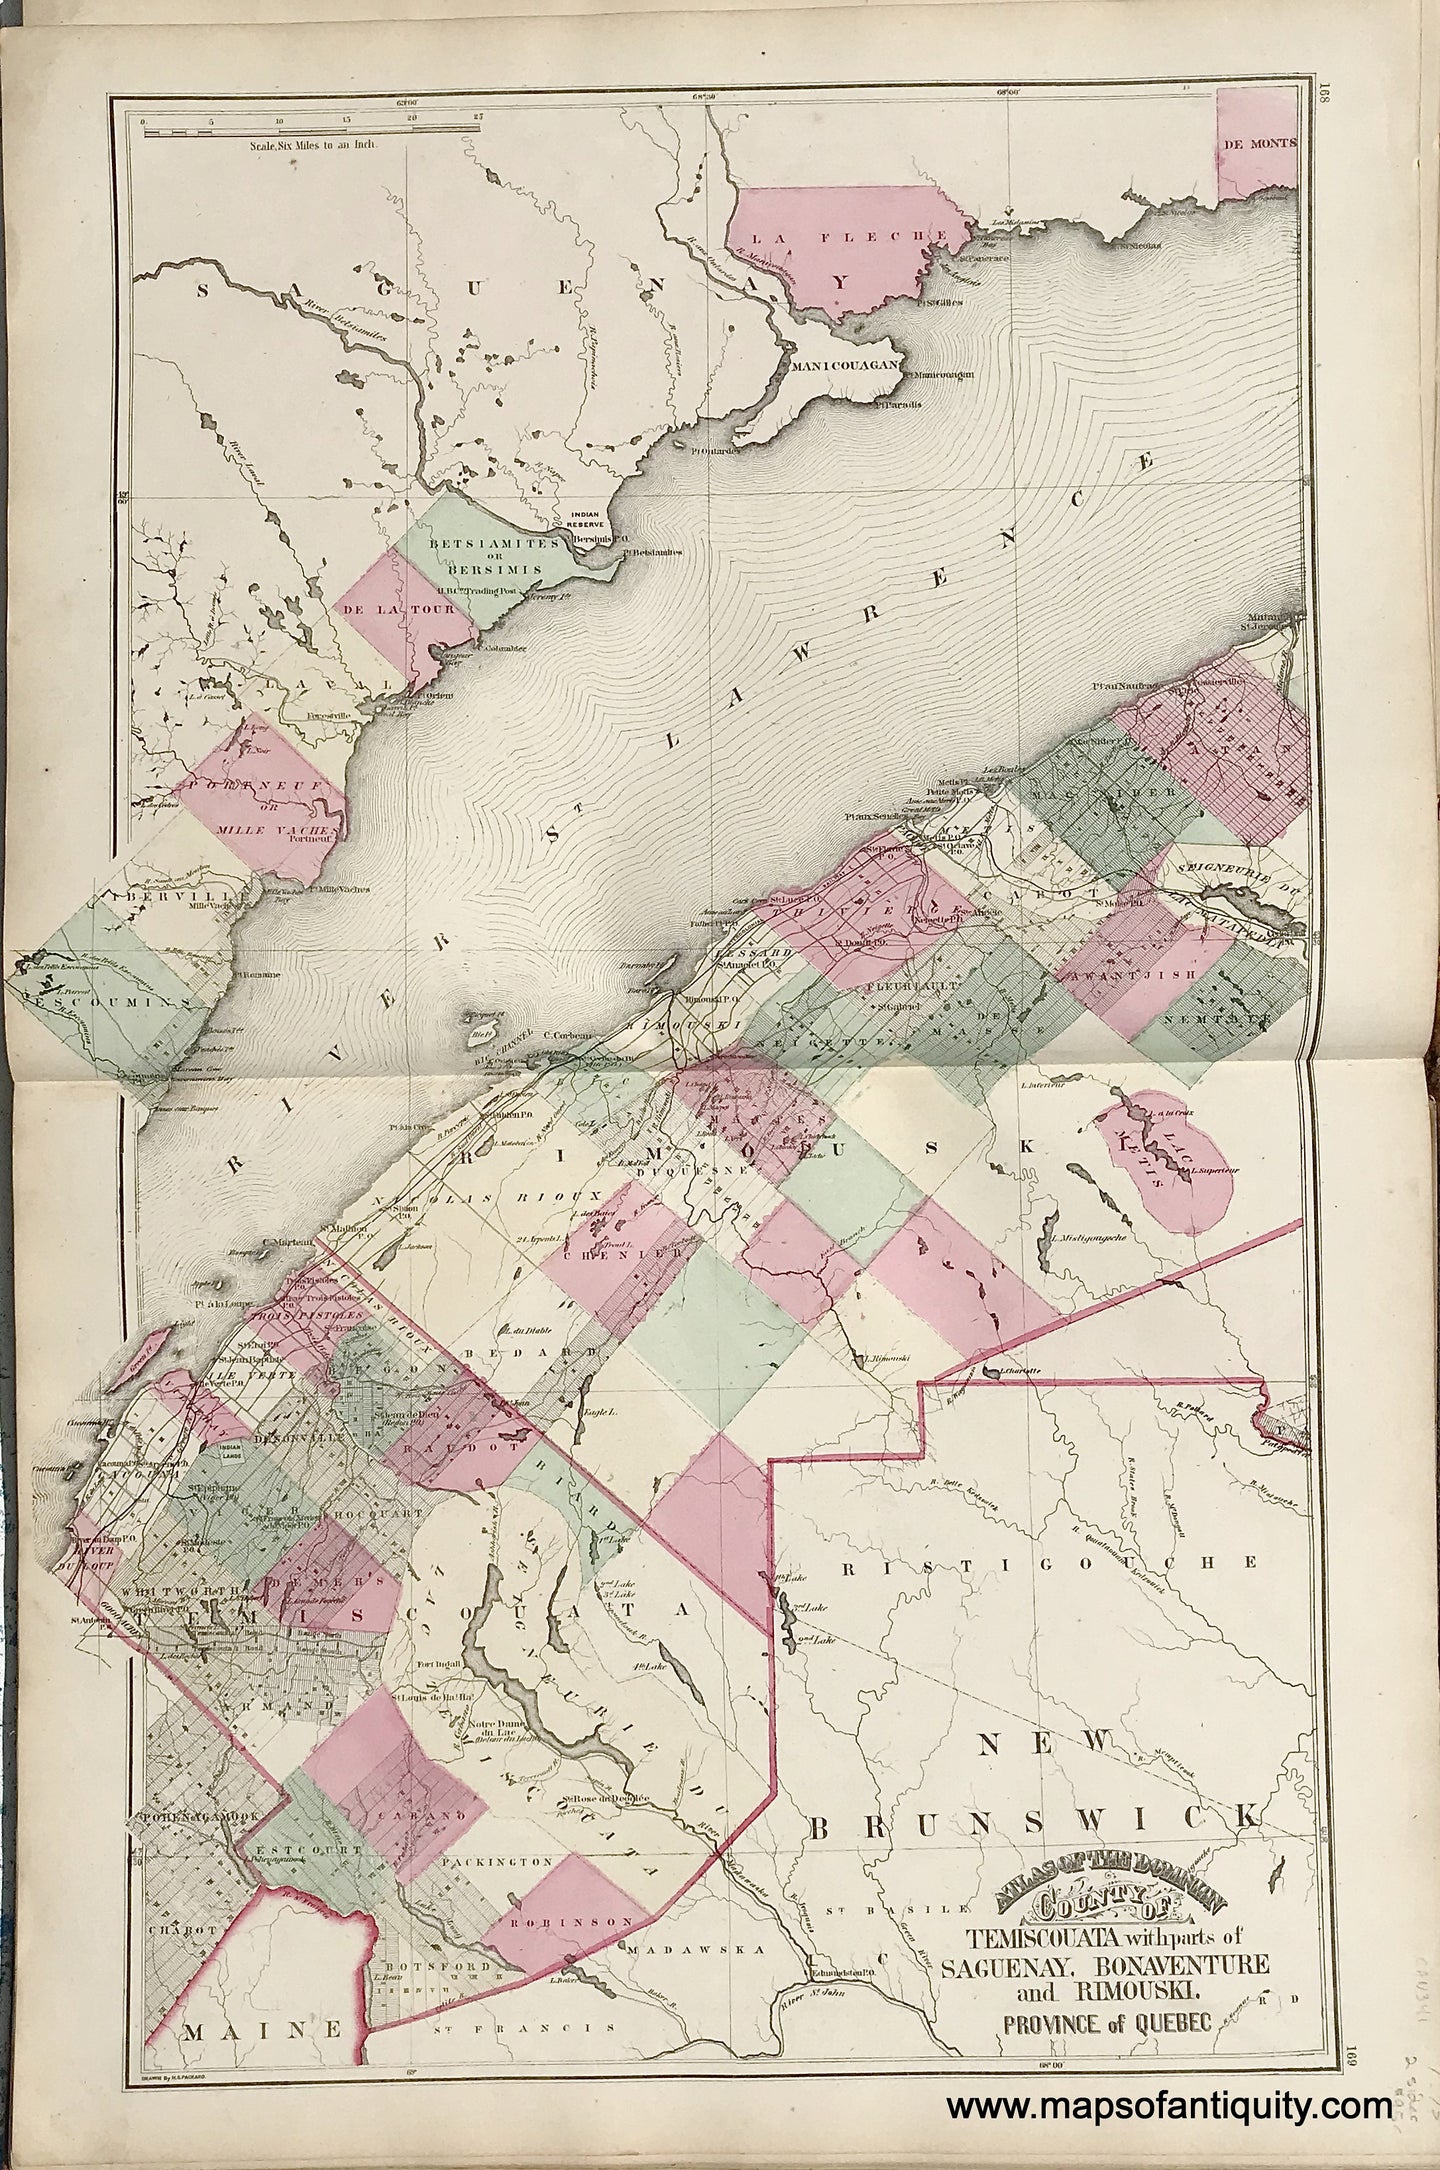 Antique-Map-Sheet-with-three-maps:-County-of-Temiscouata-with-parts-of-Saguenay-Bonaventure-and-Rimouski-in-the-Province-of-Quebec-/-Counties-of-Beauce-and-Megantic-in-the-Province-of-Quebec-/-Plan-of-Kingston-Frontenac-County-Ontario.-1875-Walling-/-Tackabury-Canada-Civil-War-1800s-19th-century-Maps-of-Antiquity